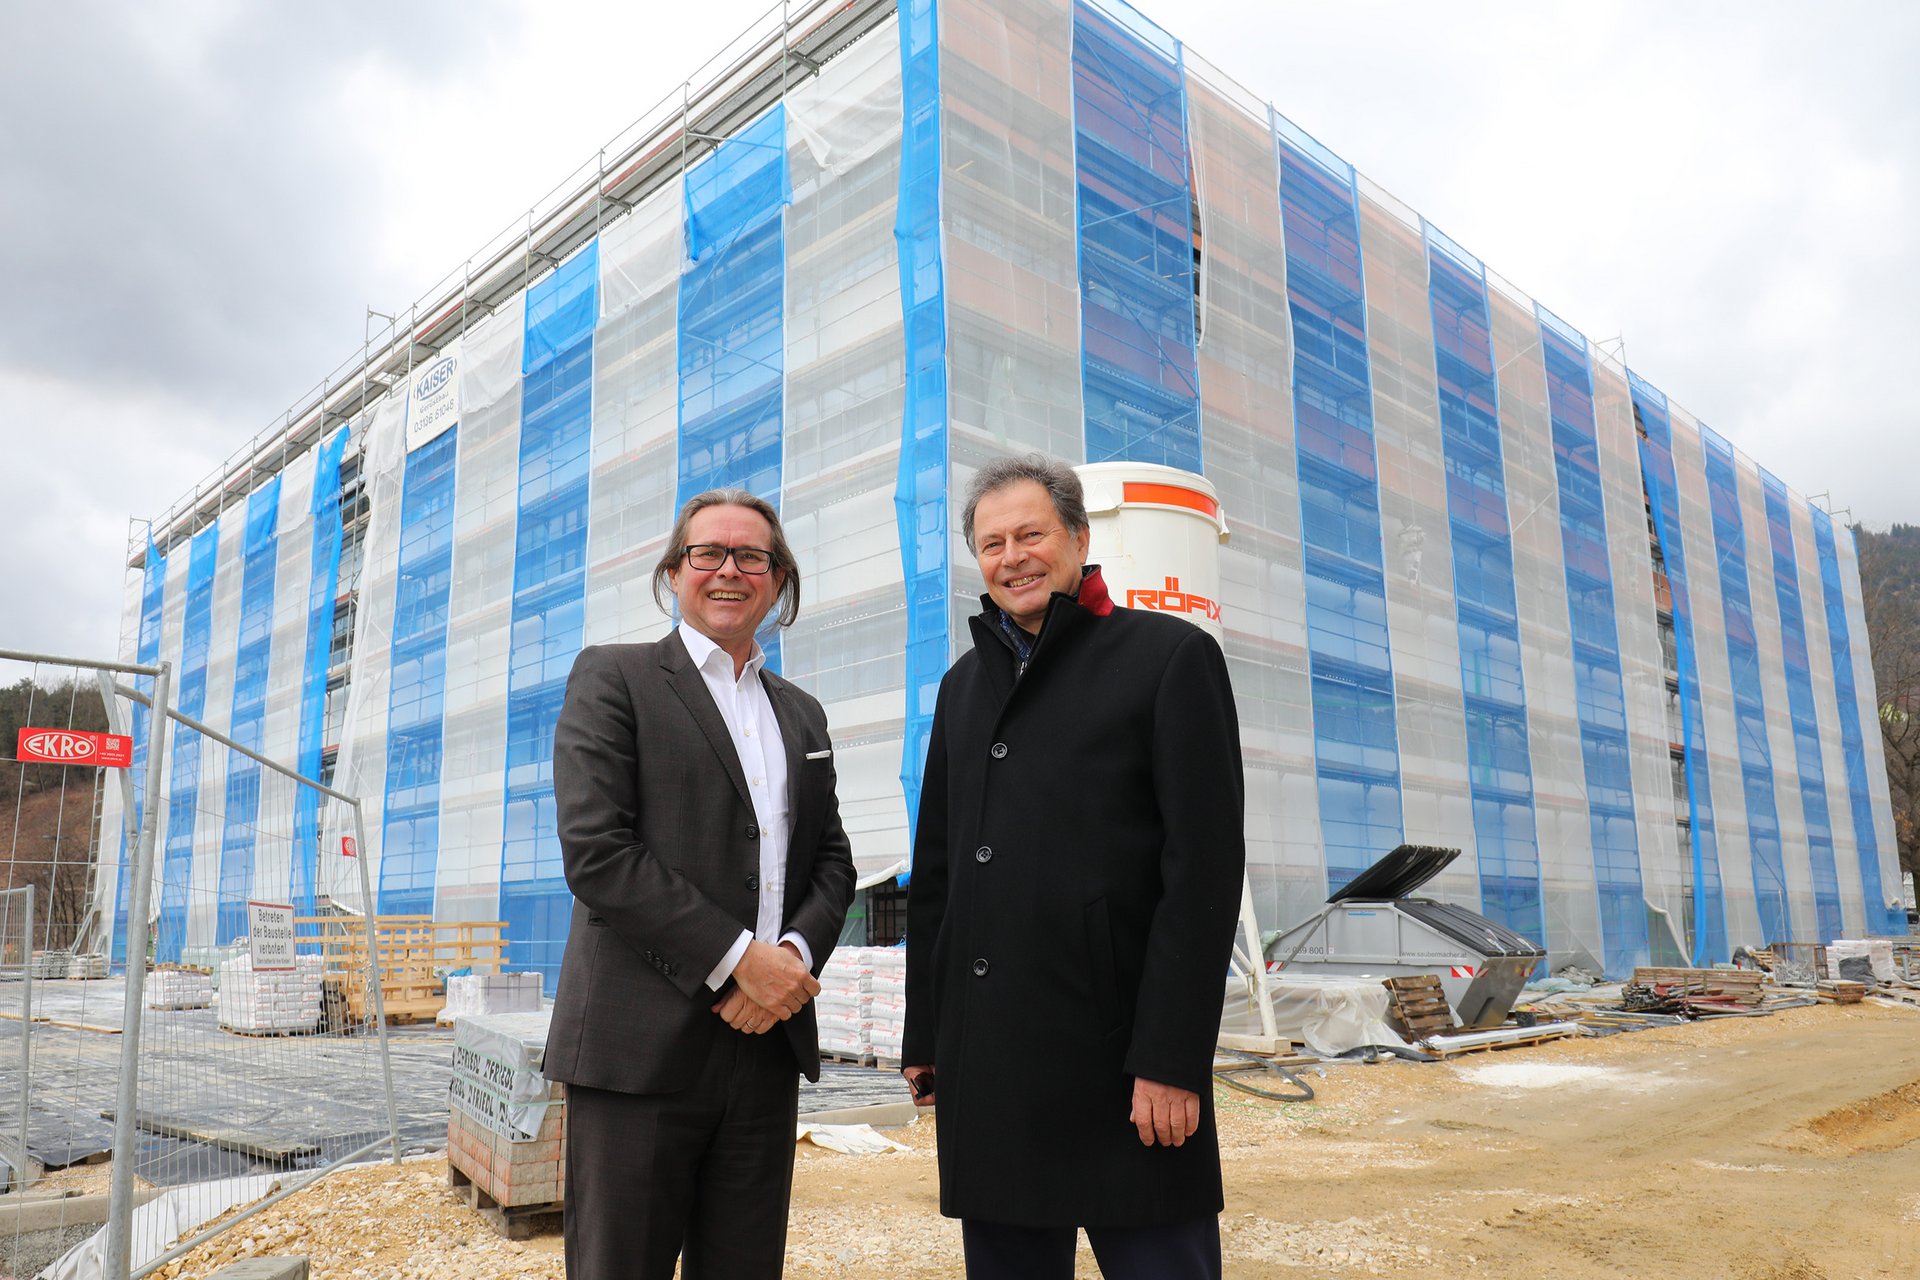 Federal Minister Polaschek with Rector Eichlseder in front of the study centre under construction.